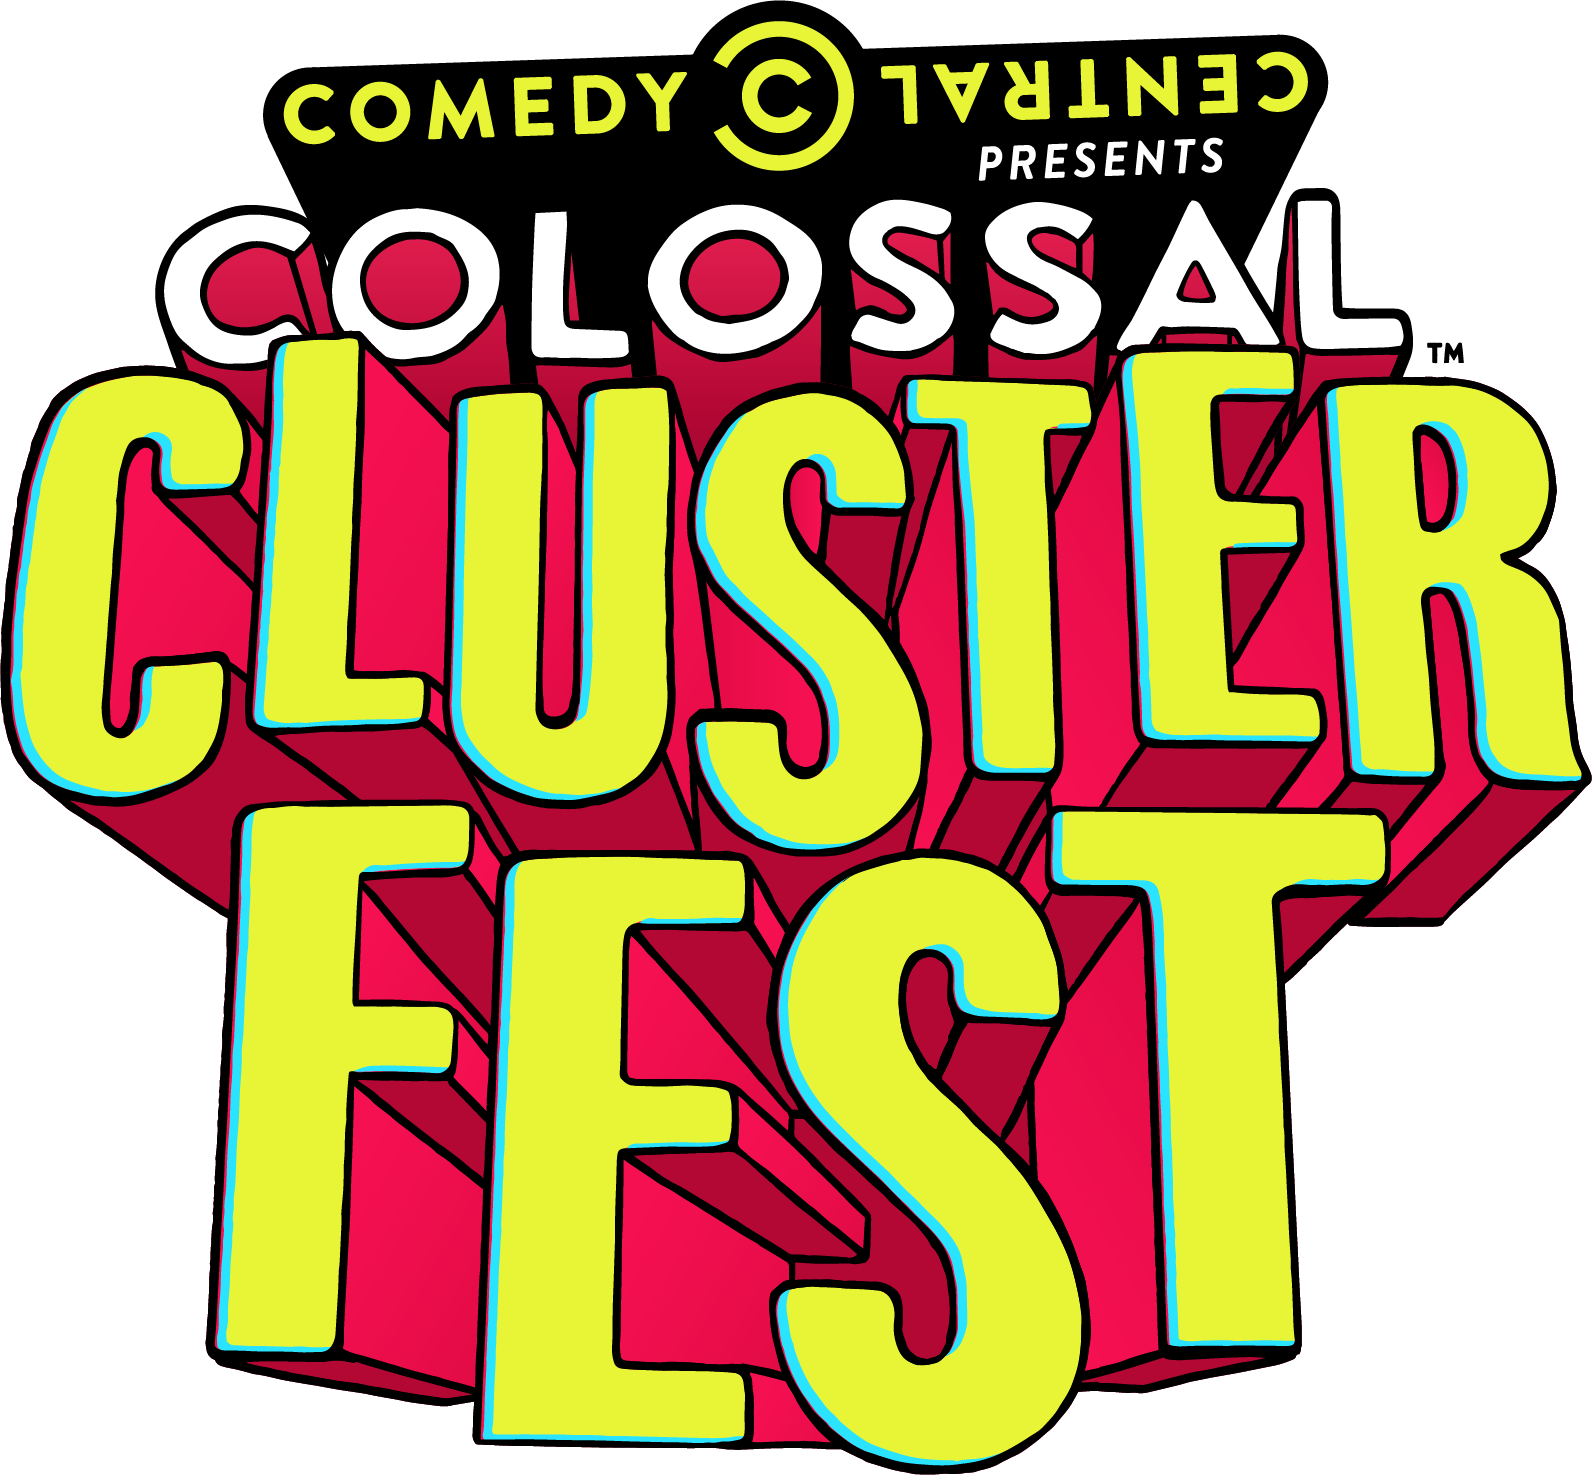 Colossal Cluster Fest Comedy Event Logo PNG